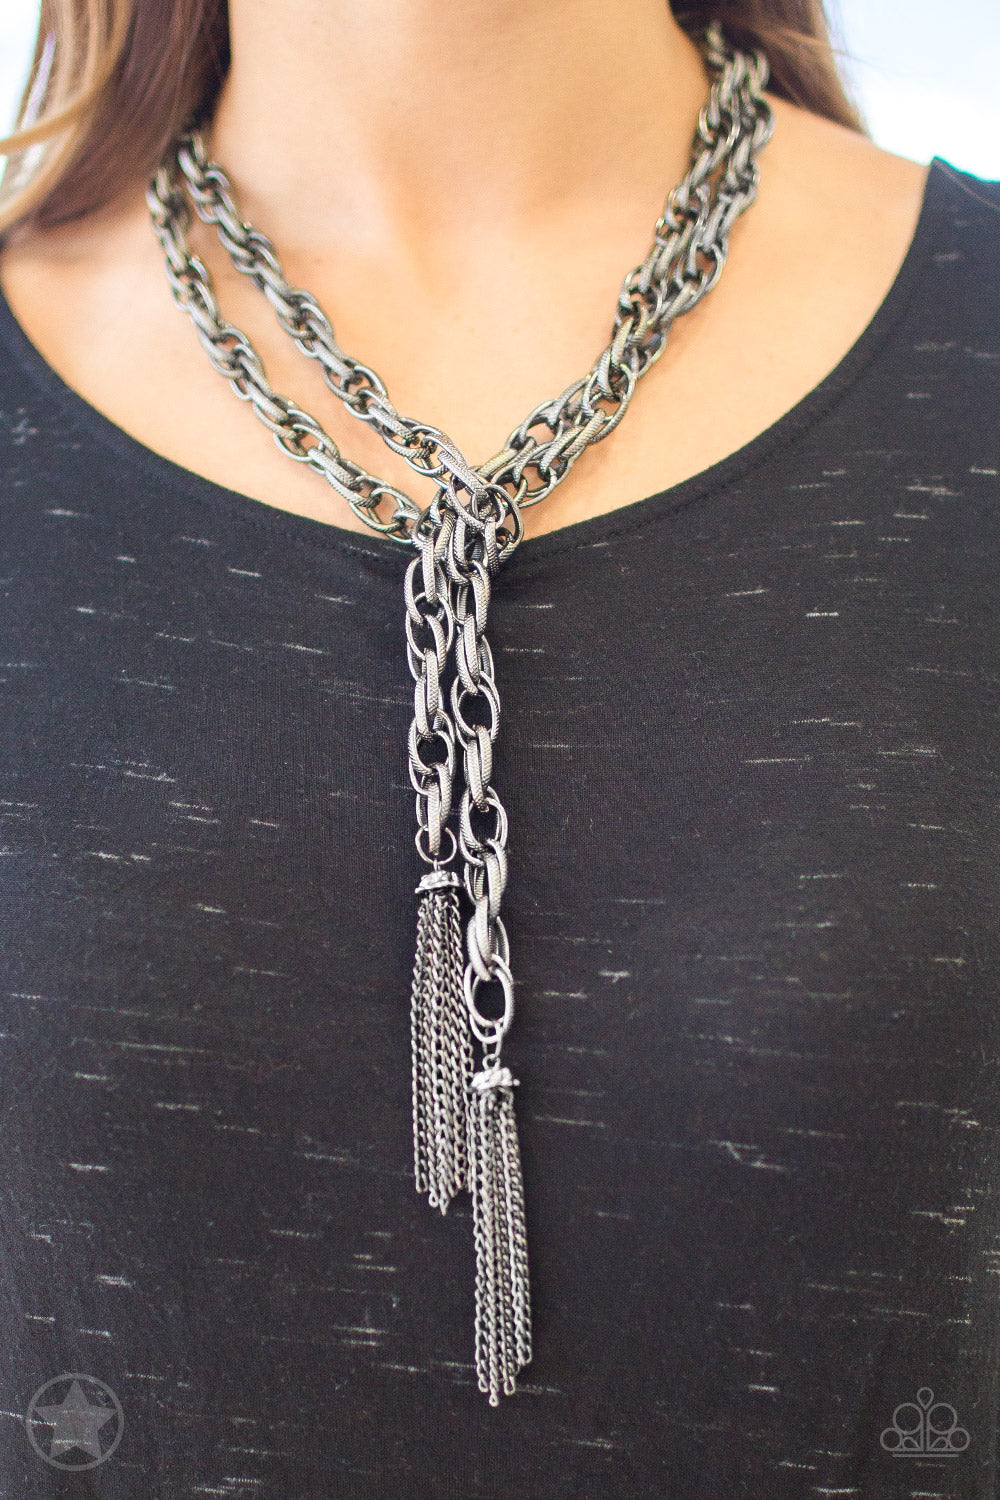 SCARFed for Attention - Black/Gunmetal necklace